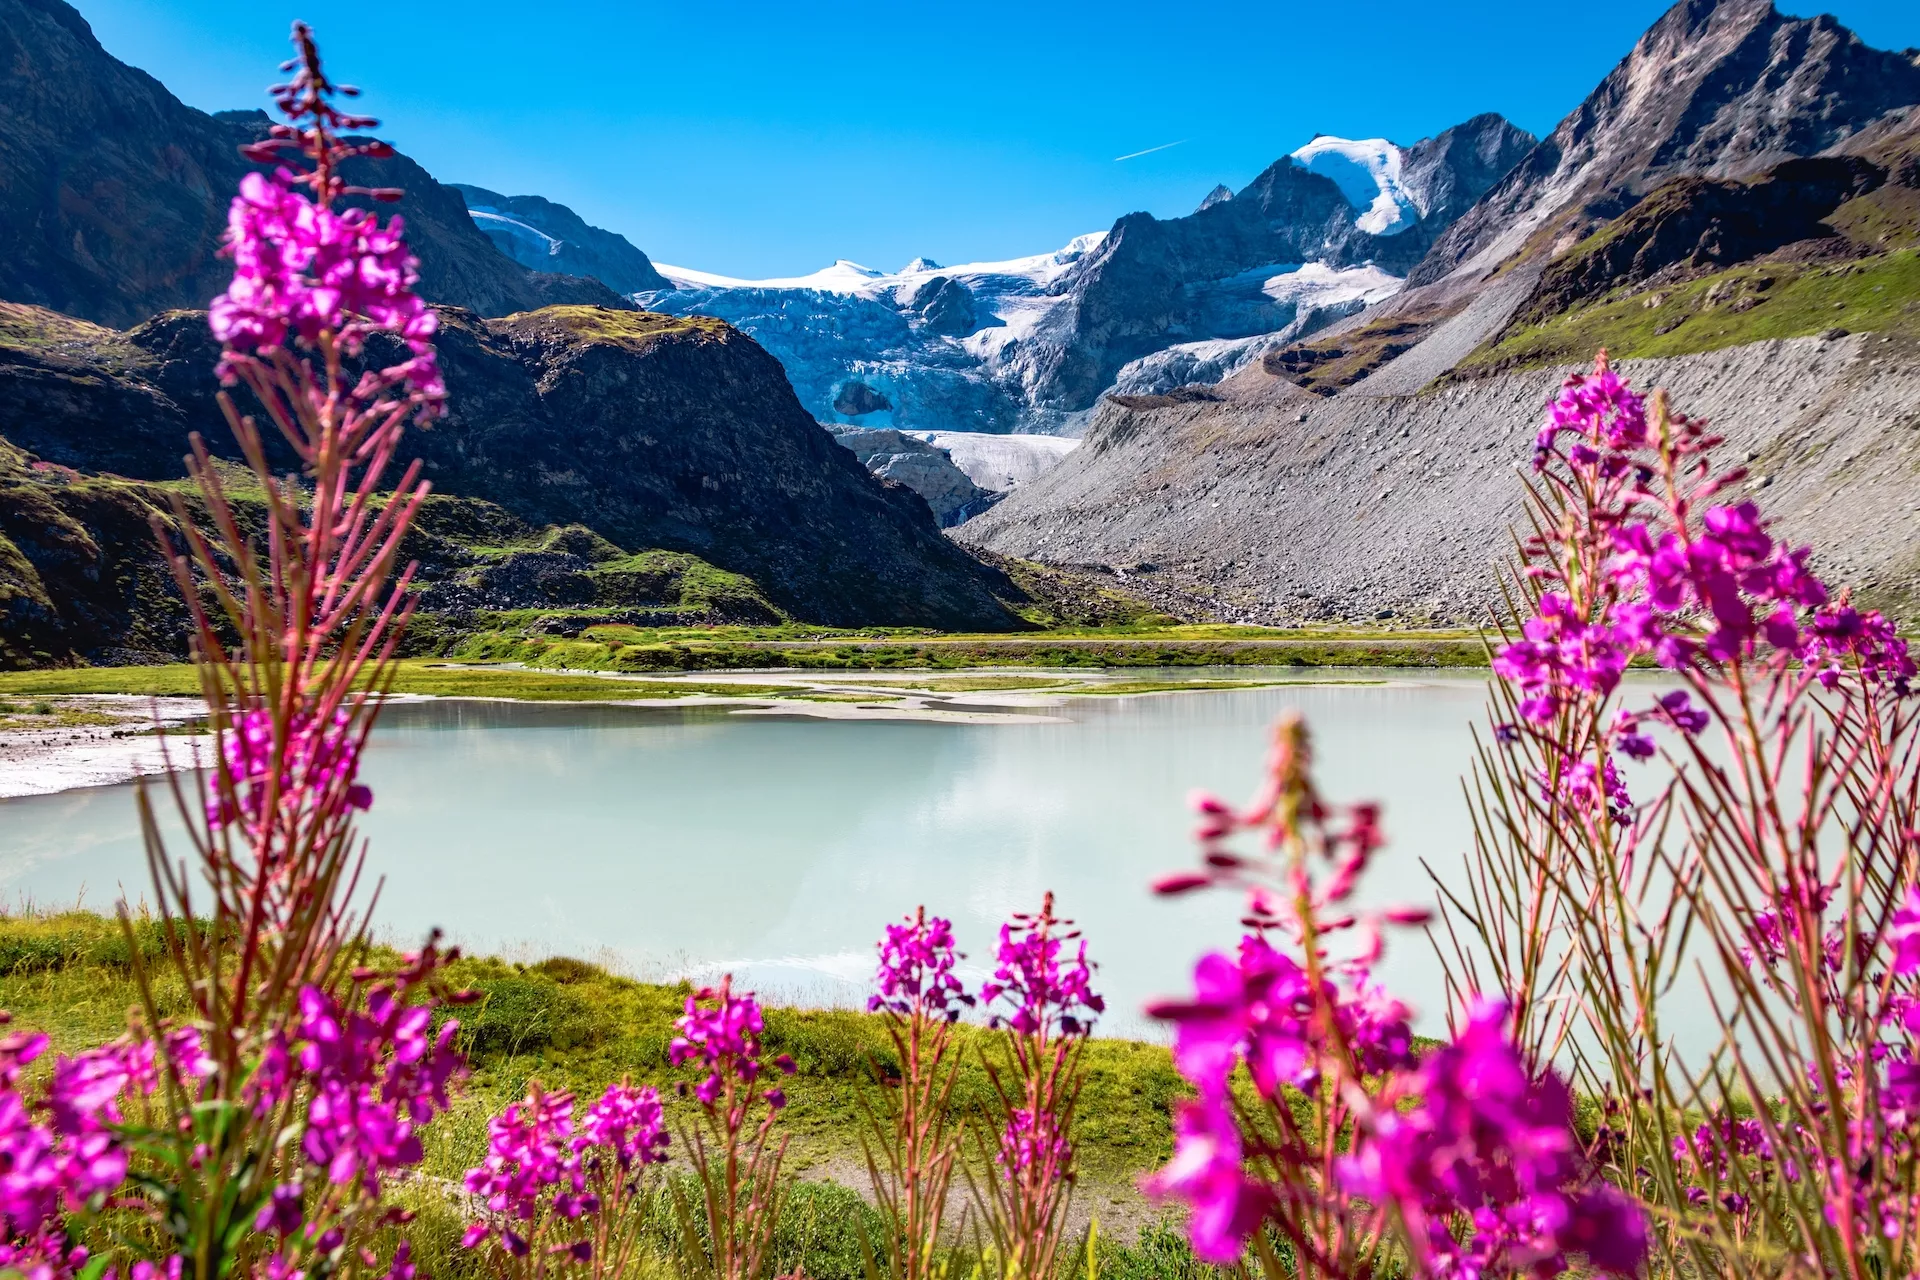 View of the Moiry Glacier from the Lac de Chateaupre surrounded by flowers in summer